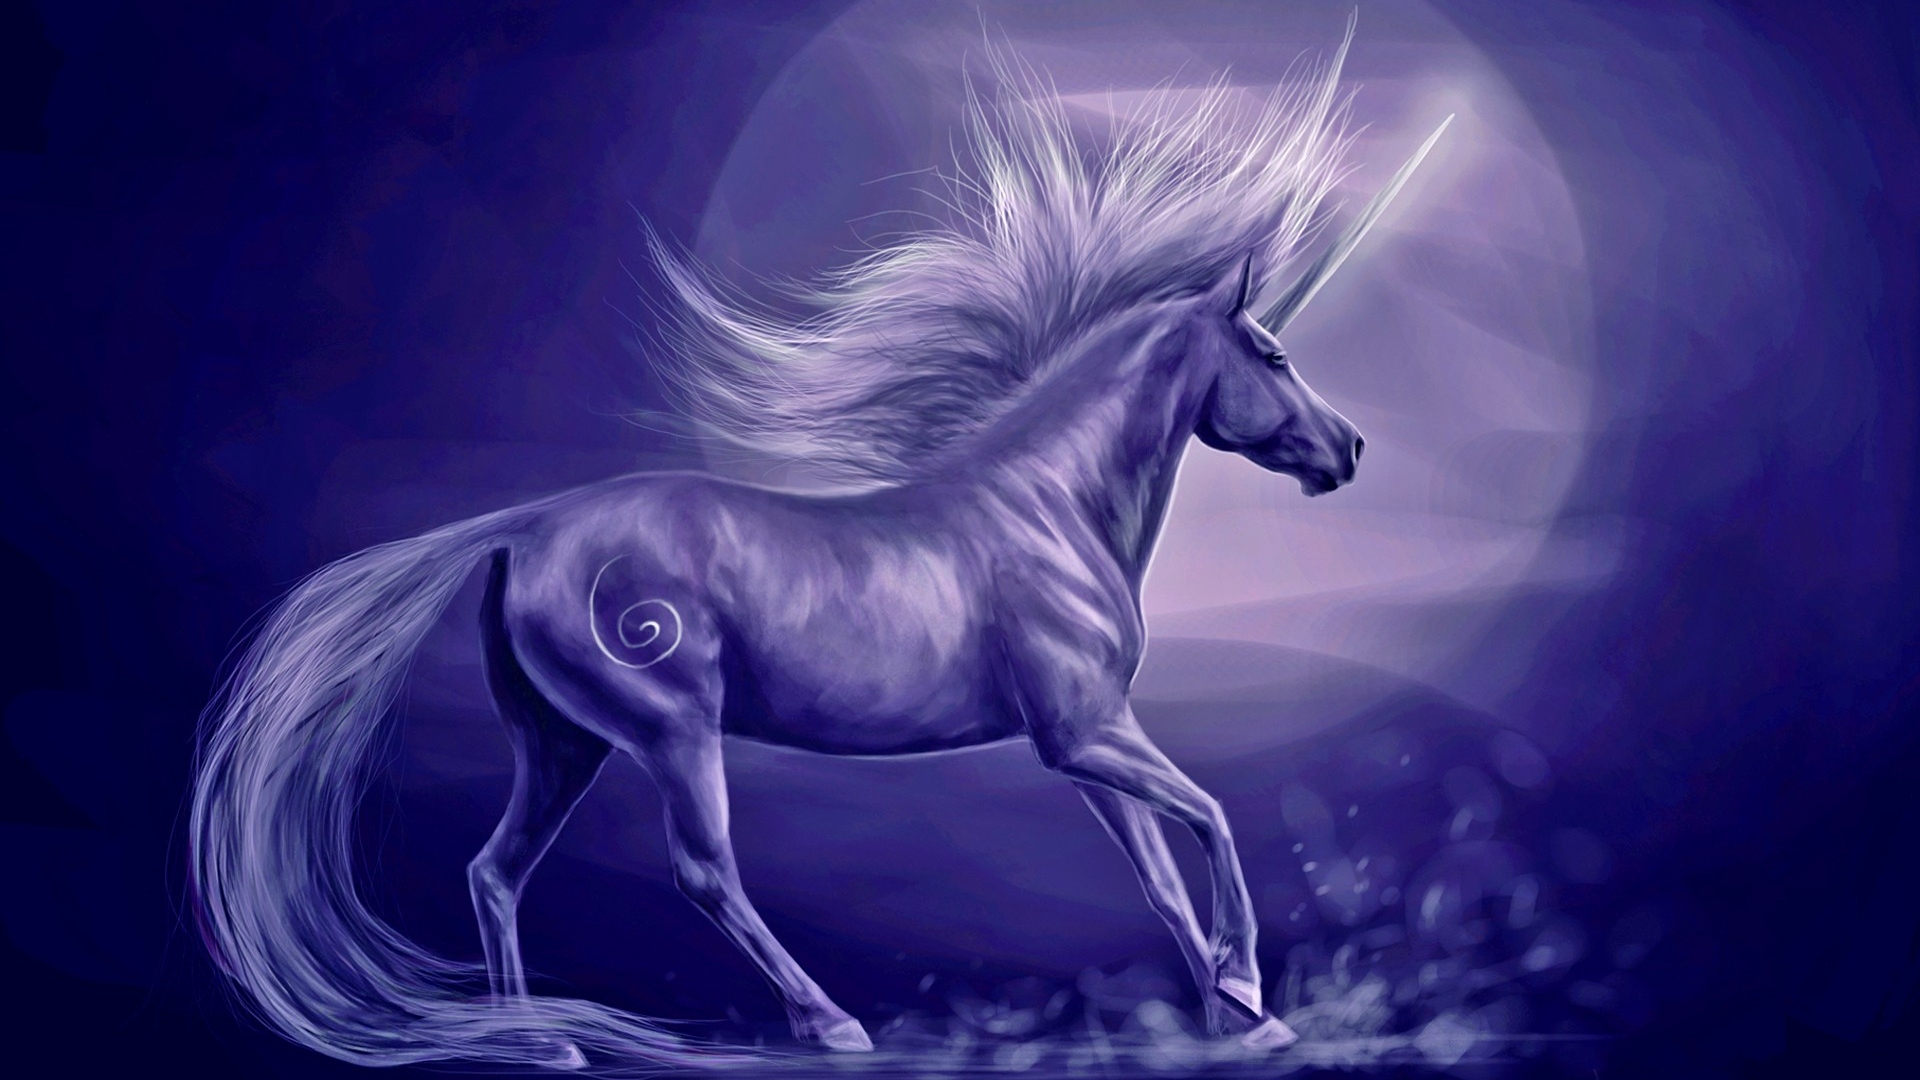 unicorn wallpaper hd,horse,fictional character,sky,mane,mythical creature